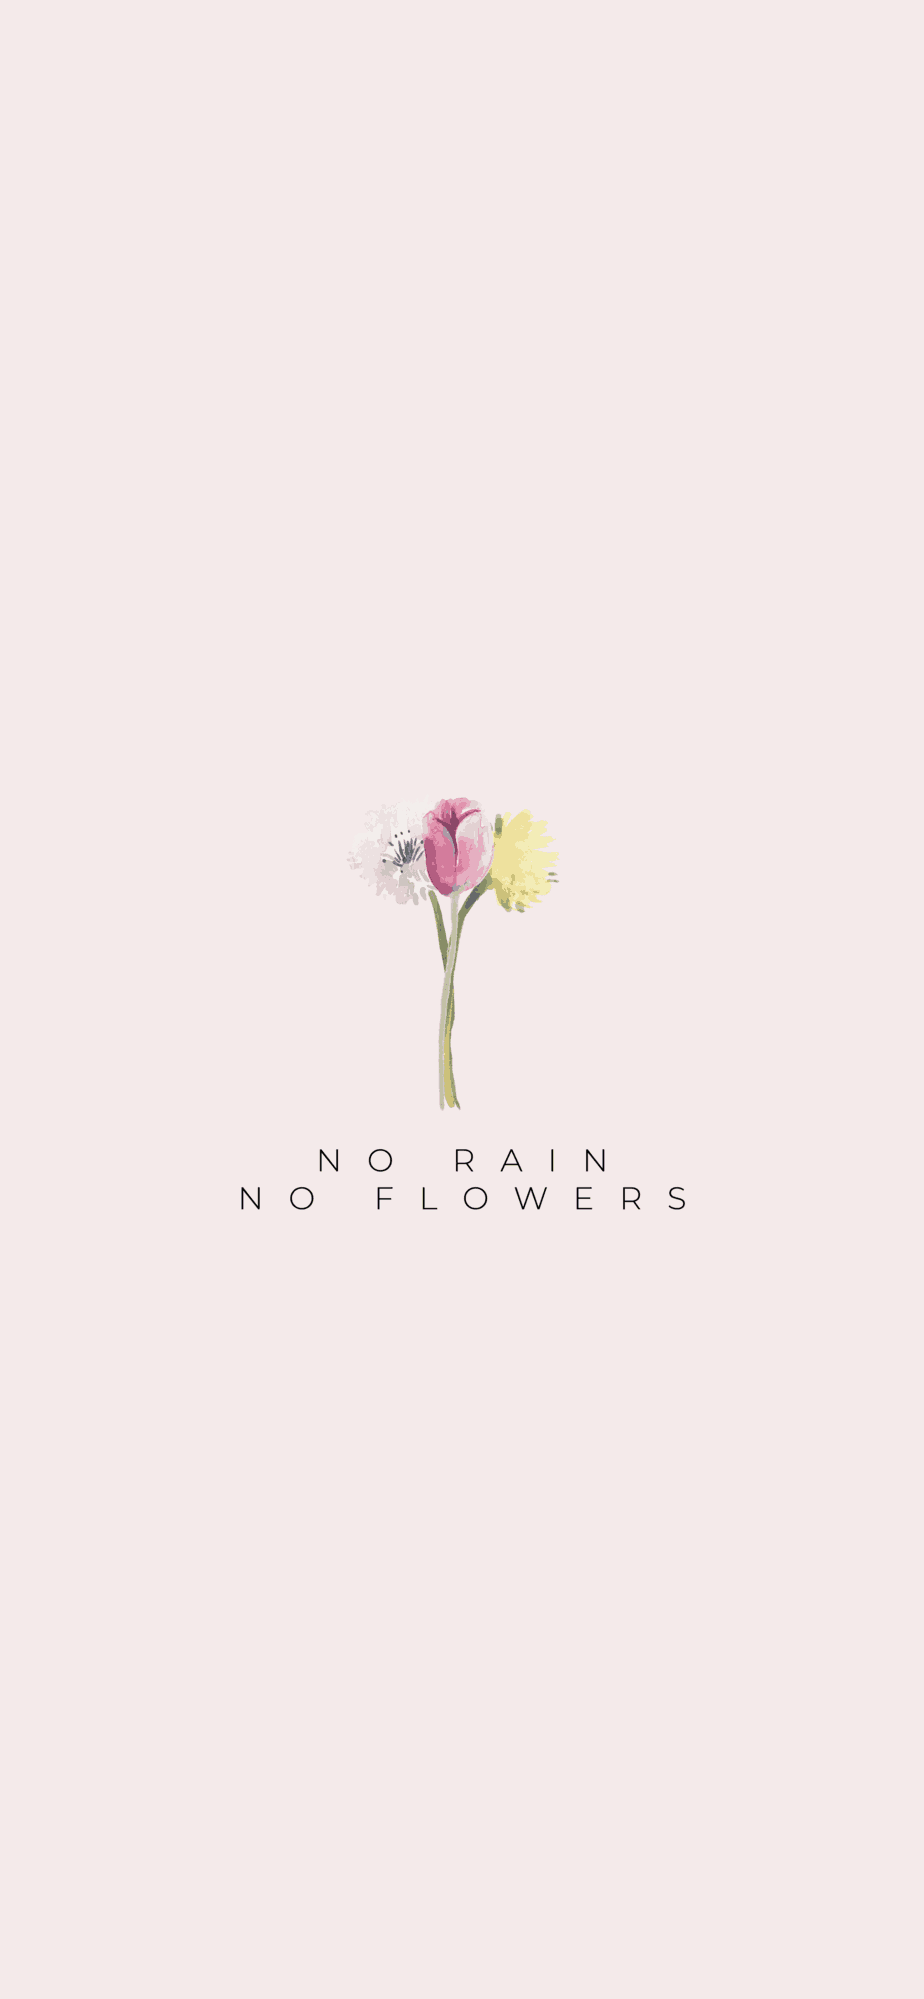 No Rain No Flowers Wallpaper Via Krista Smith At Activateherawesome Activate Her Awesome No Rain No Flowers Flower Wallpaper Wallpaper Iphone Cute